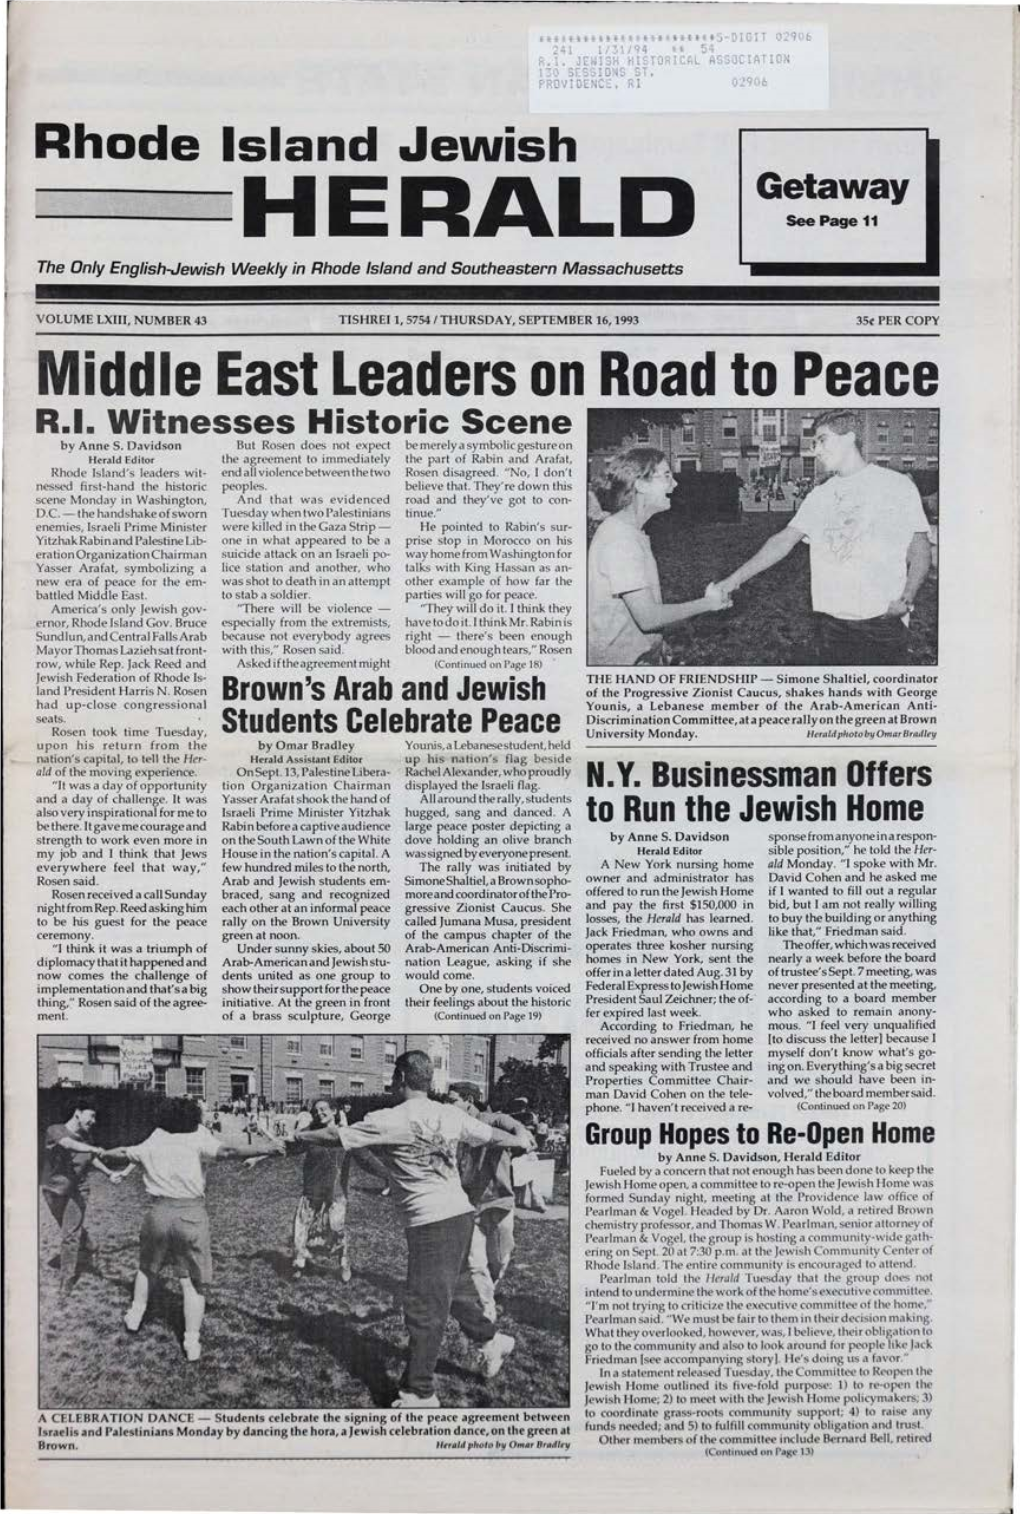 SEPTEMBER 16, 1993 35( PER COPY Middle East Leaders on Road to Peace R.I